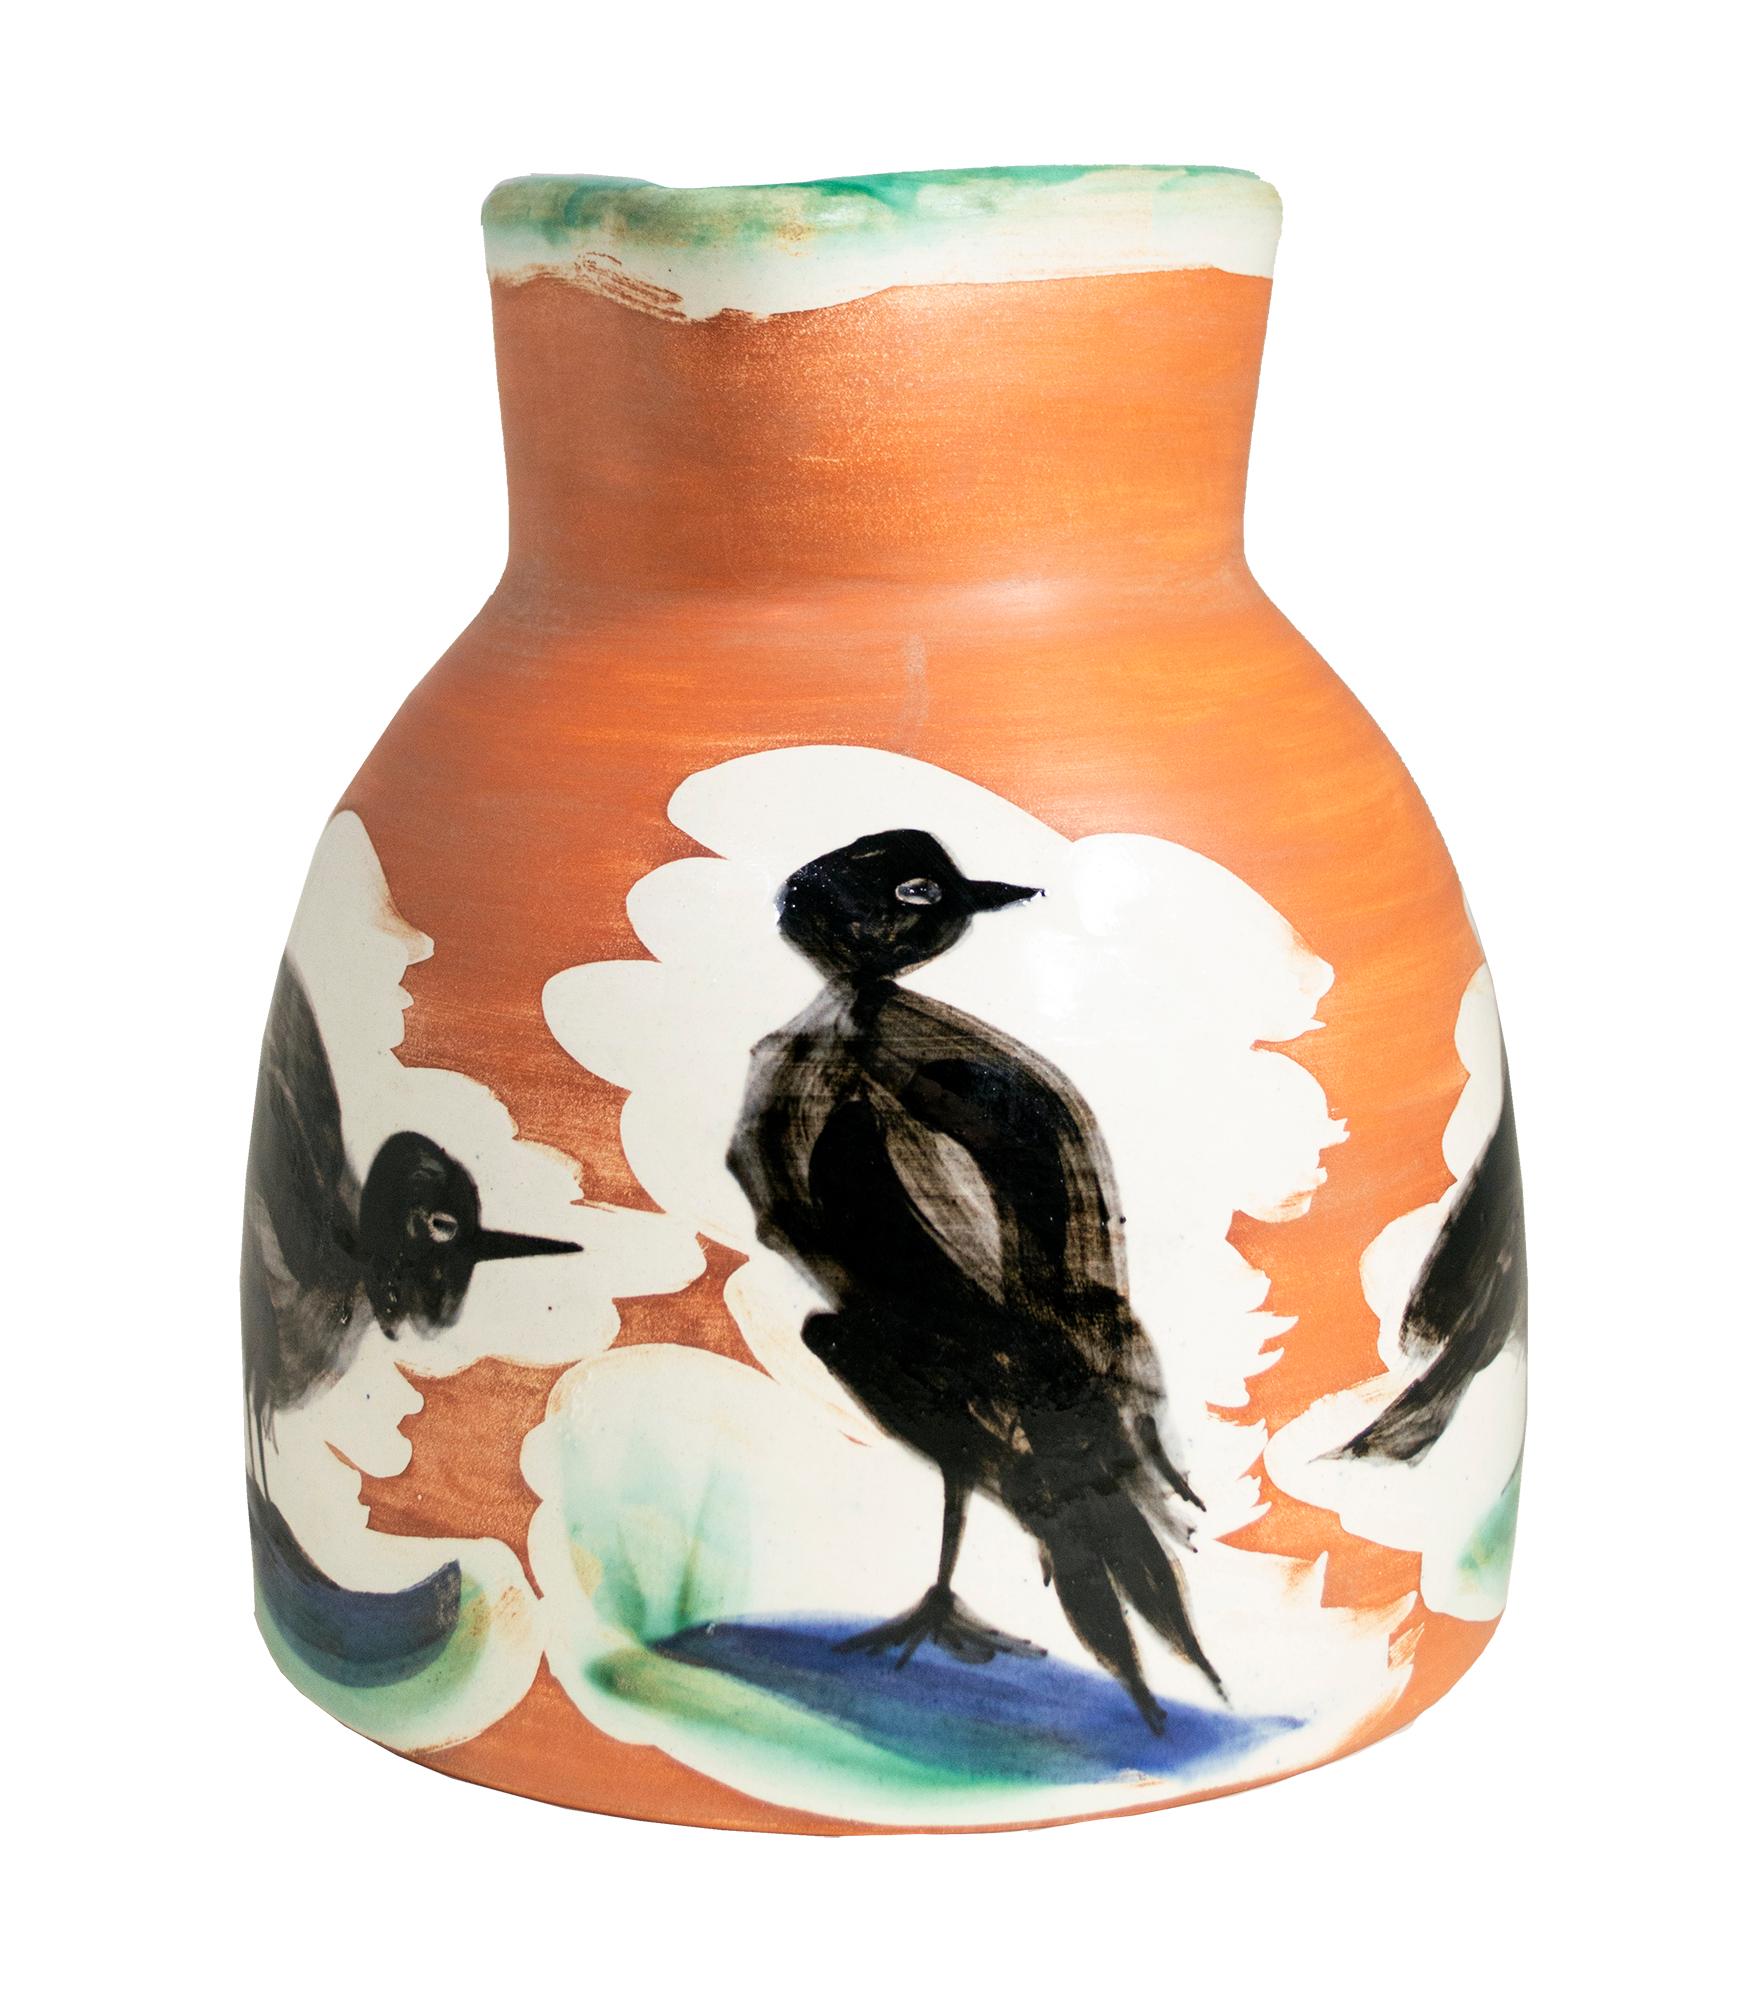 'Pitcher with Birds' original Madoura ceramic turned pitcher, Edition Picasso - Sculpture by Pablo Picasso